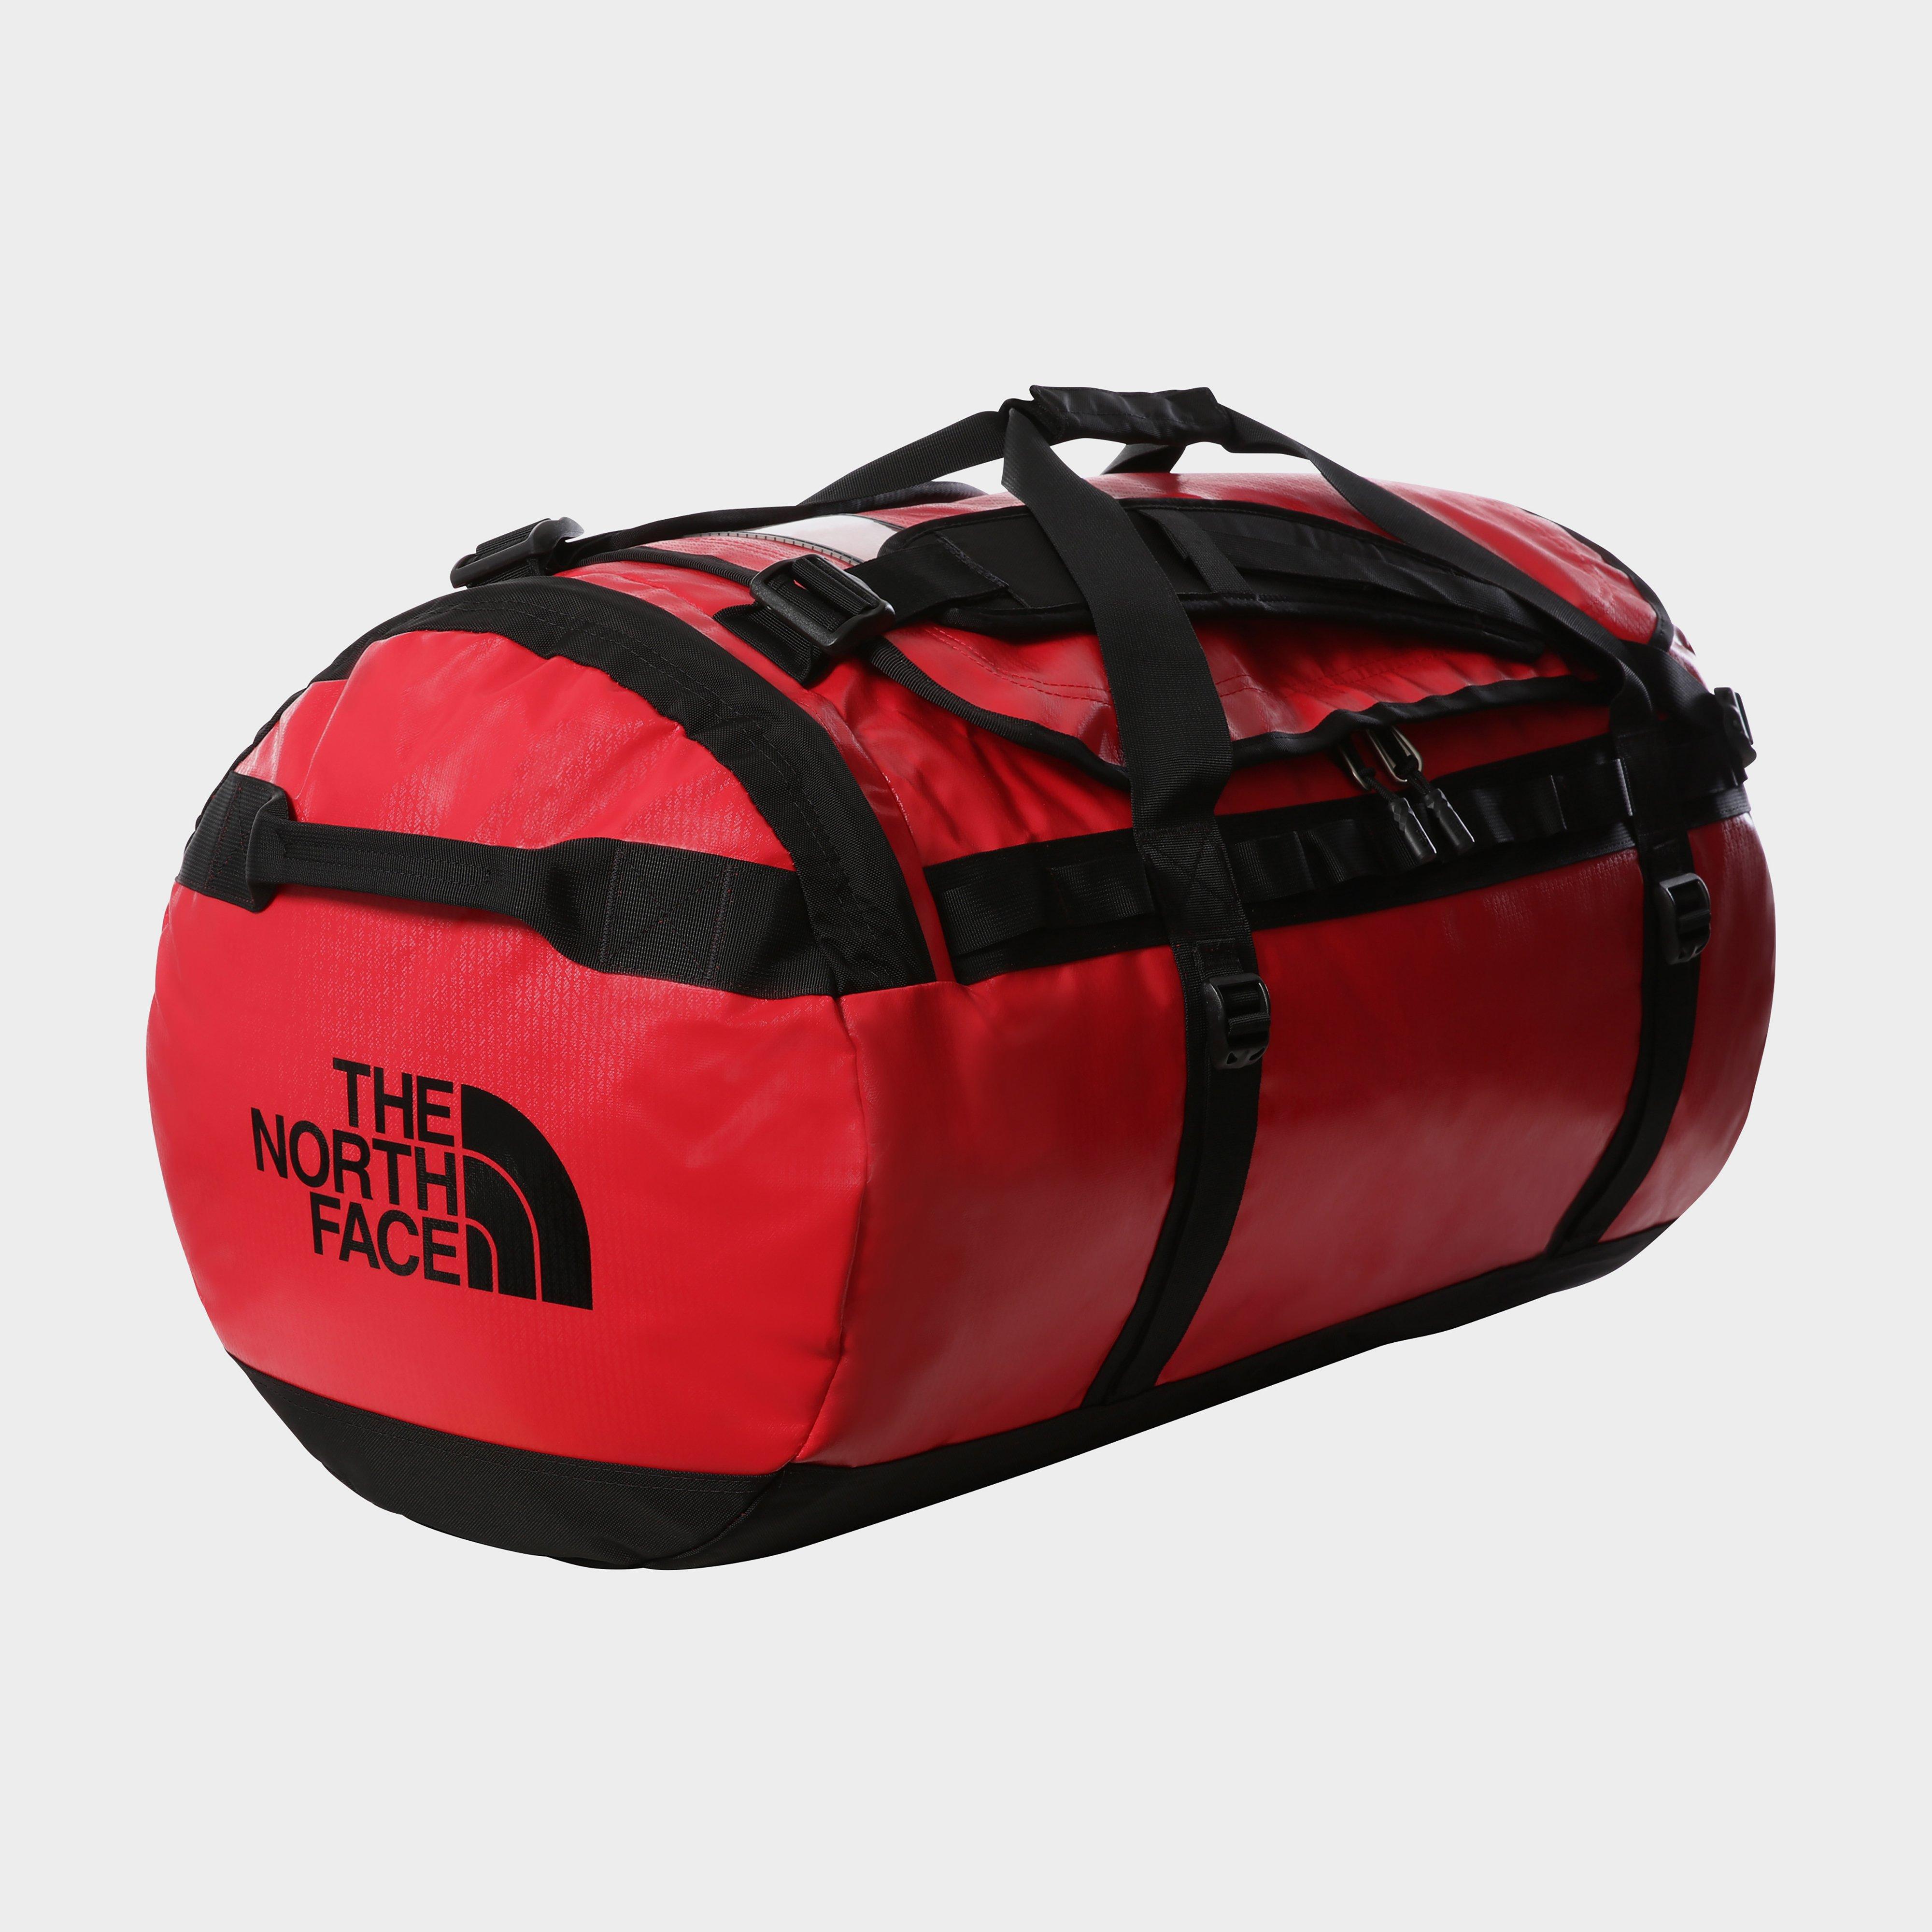 The North Face The North Face Base Camp Large Duffel Bag - Red, Red